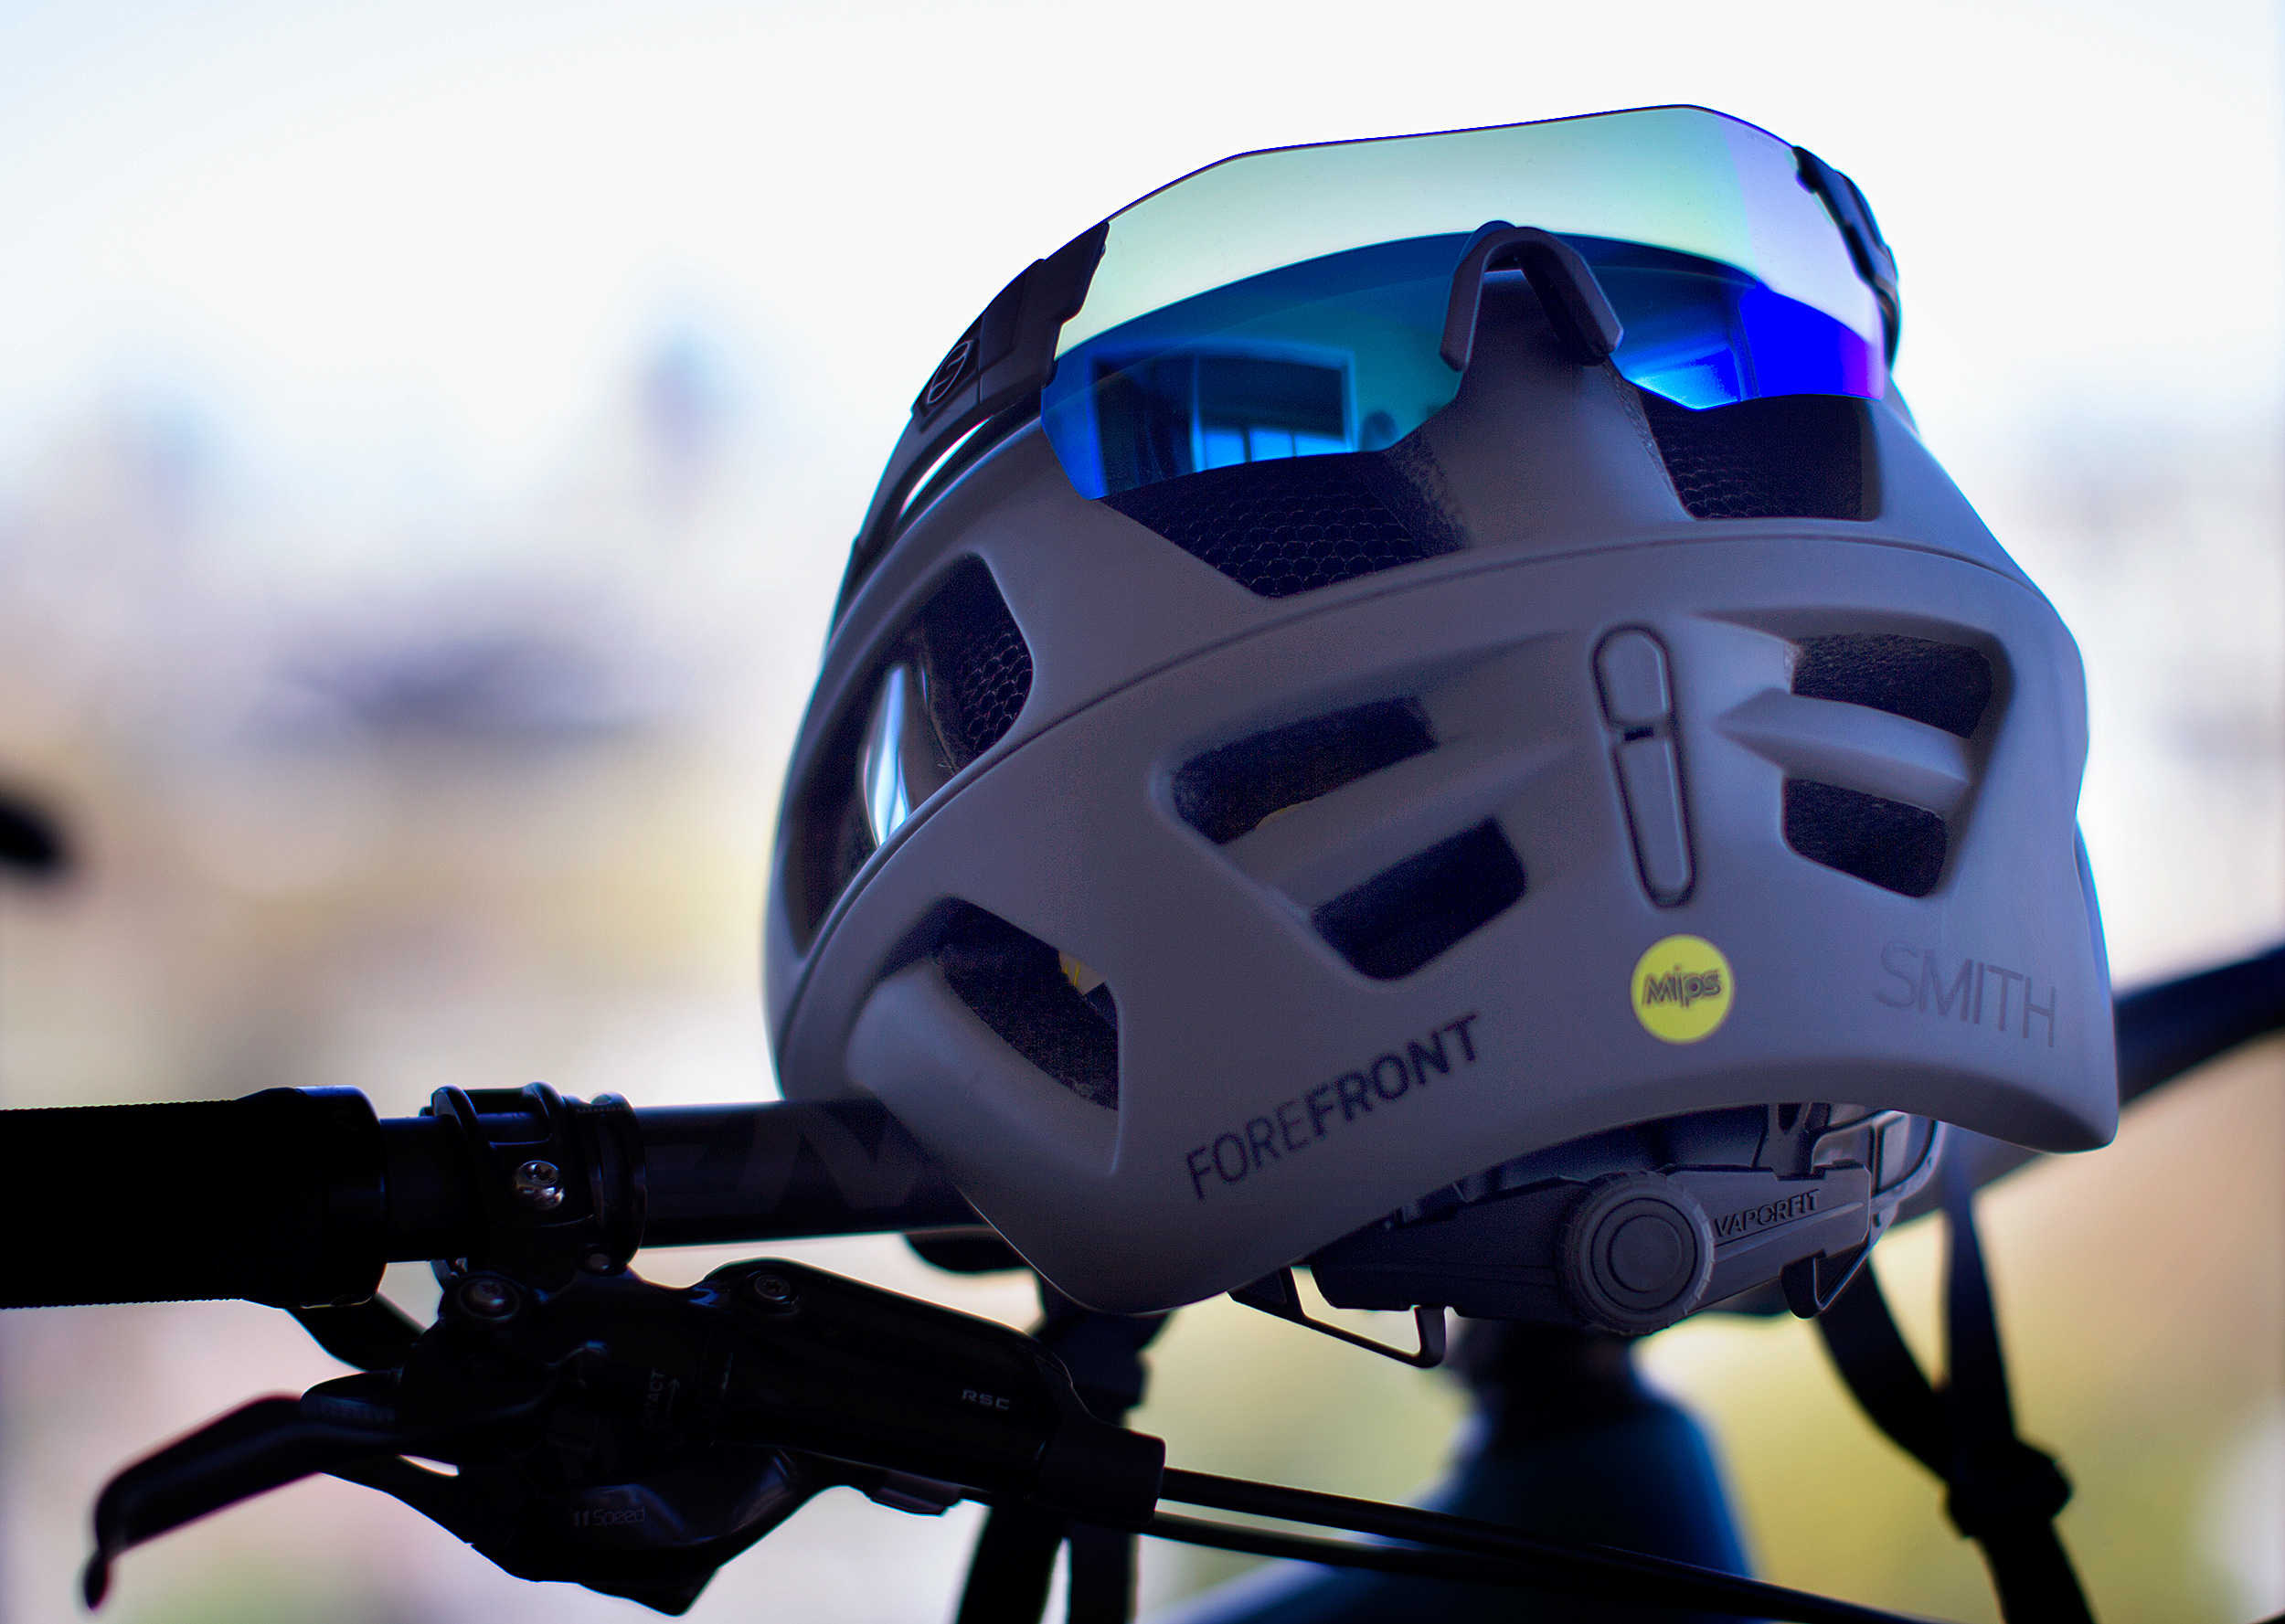 Protect your gray matter with Smith Optics' Forefront bike helmet (now with MIPS), and maybe toss in some cool shades, too.